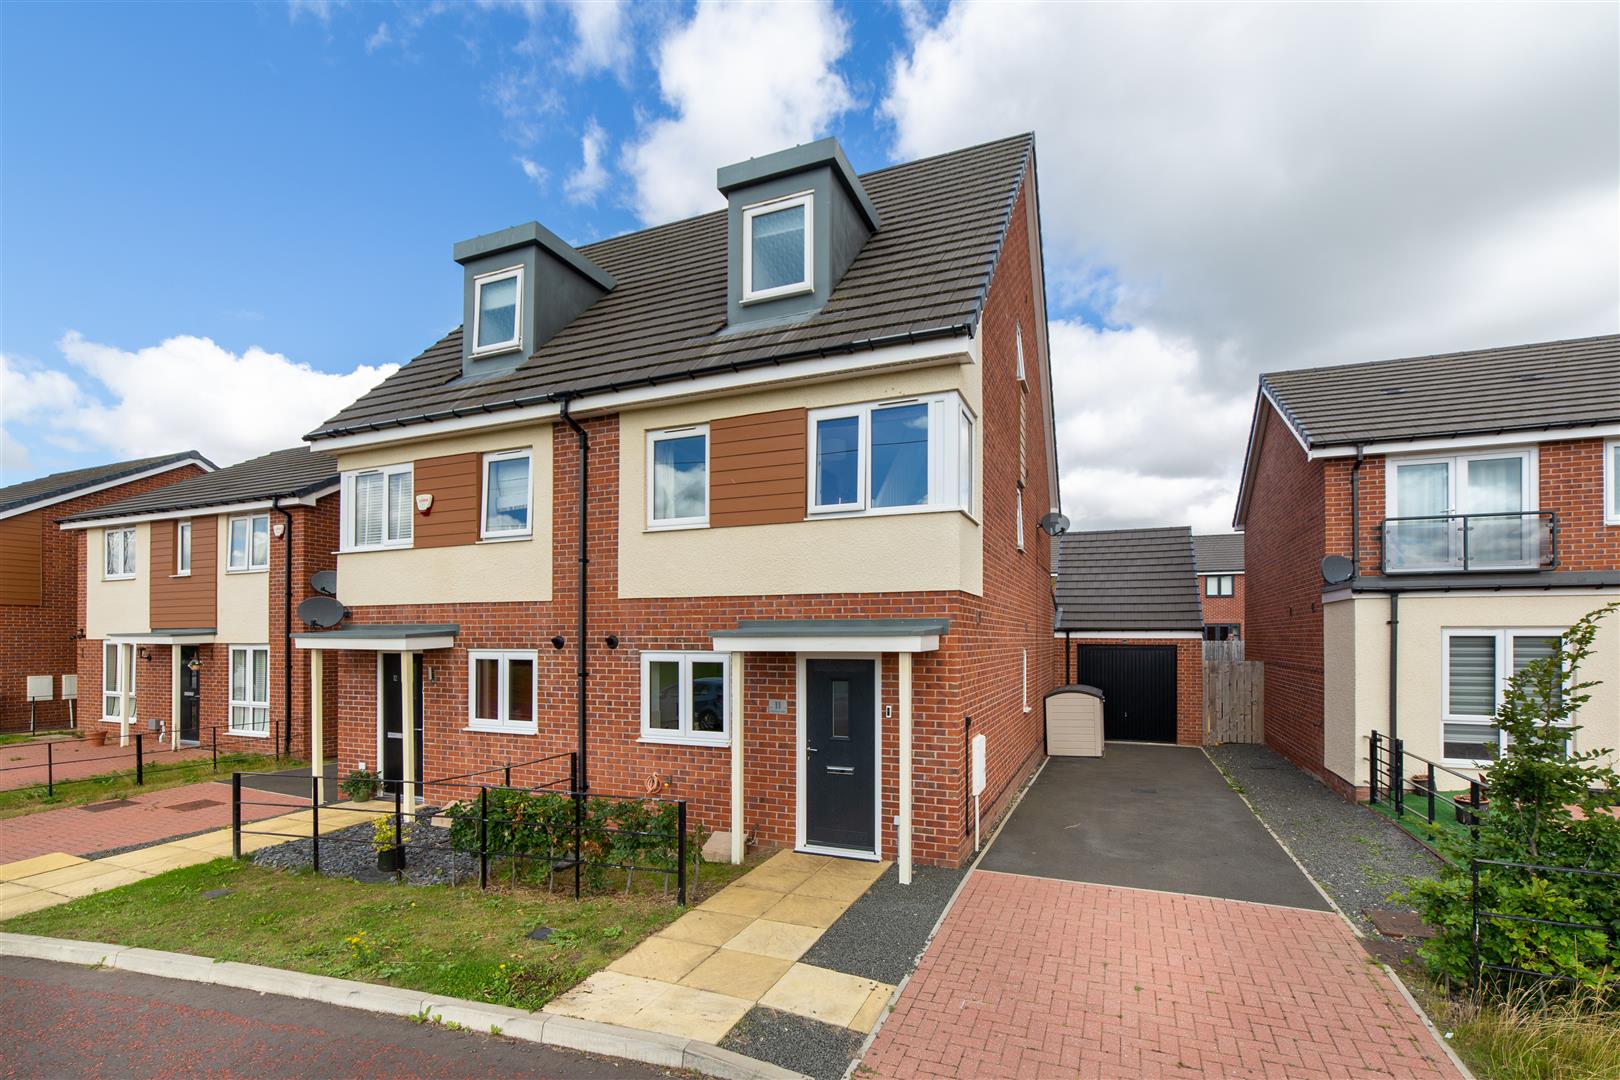 3 bed town house for sale in Shotton View, Great Park  - Property Image 1